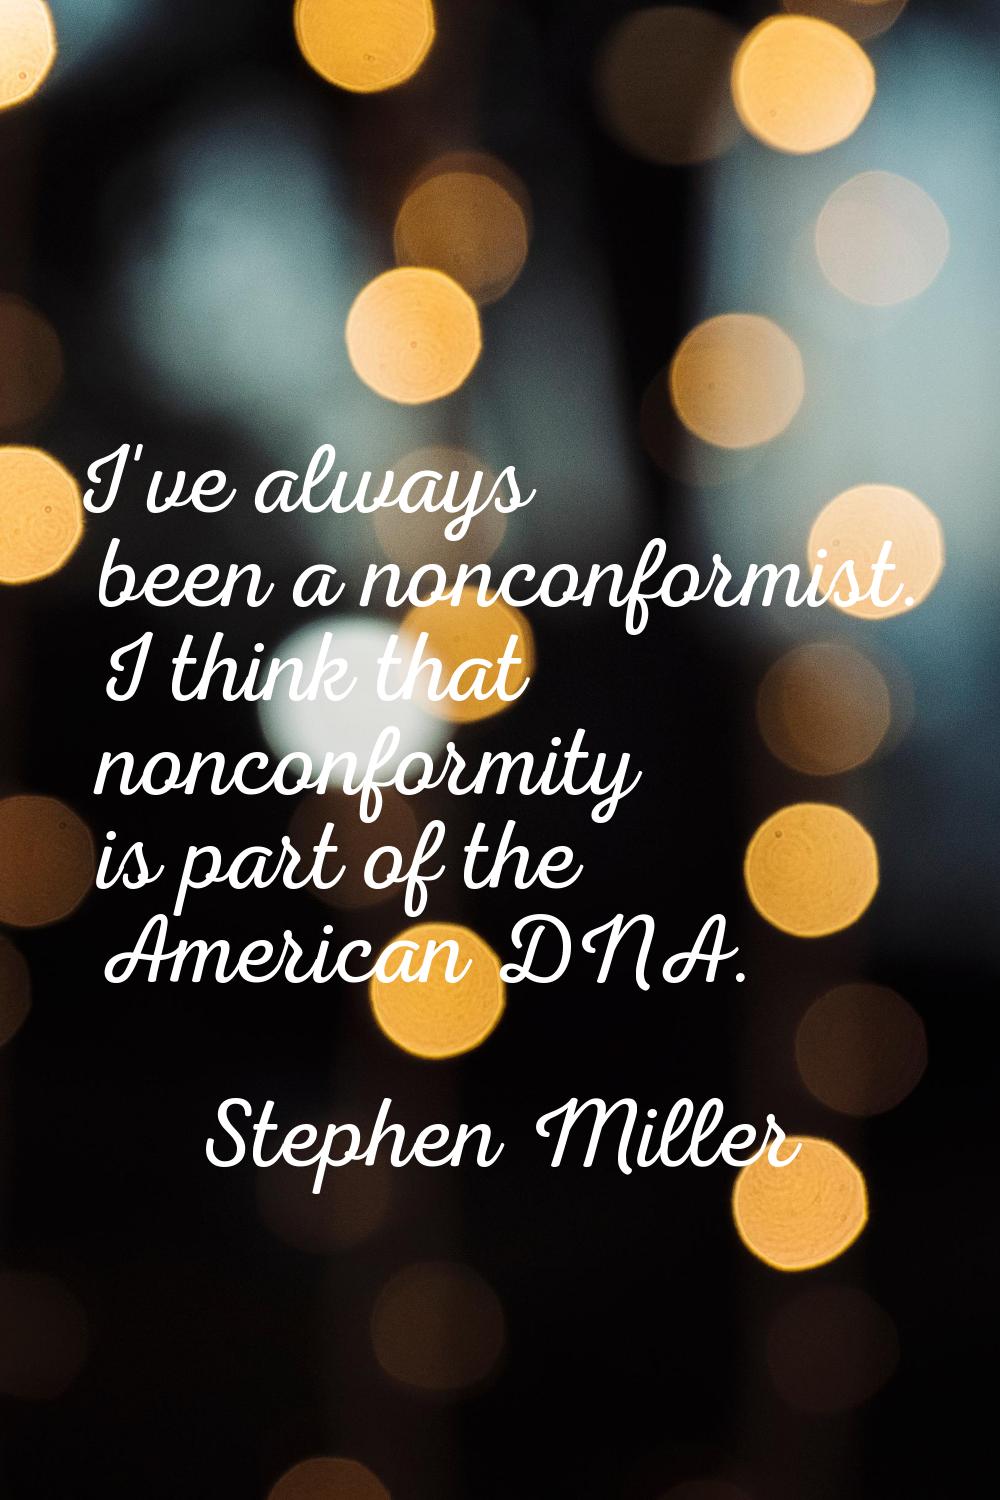 I've always been a nonconformist. I think that nonconformity is part of the American DNA.